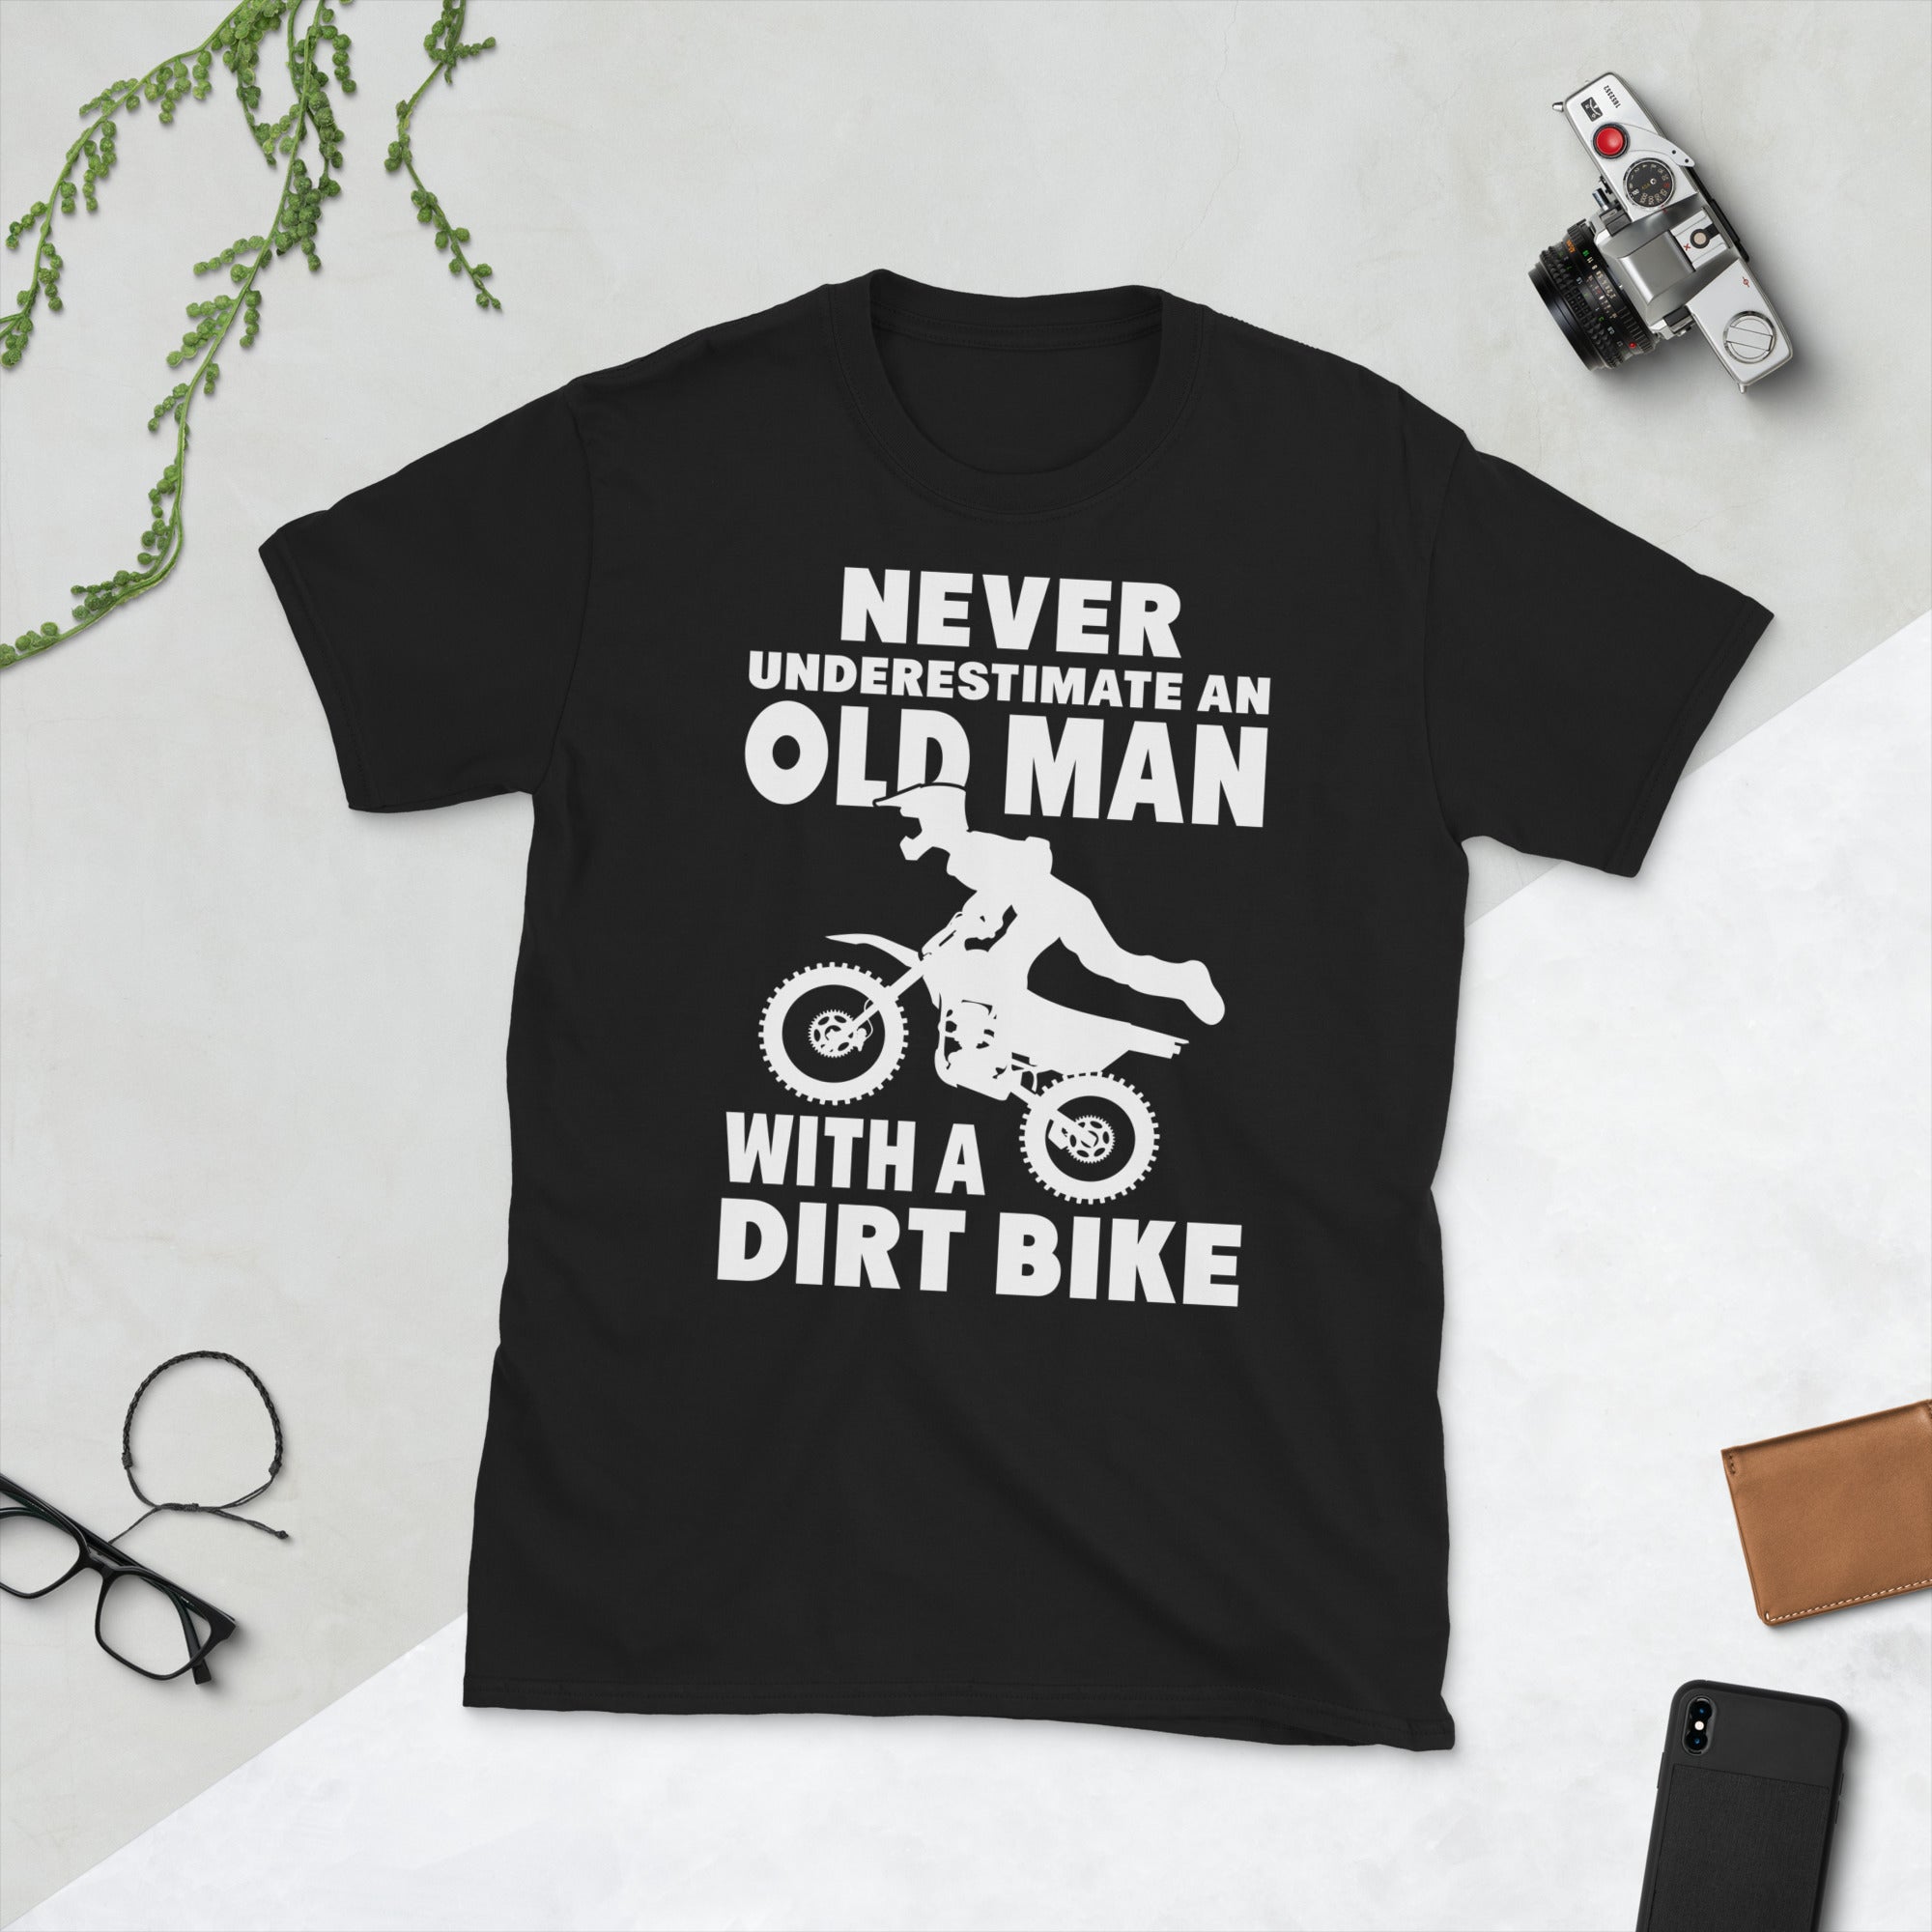 Never Underestimate An Old Man With A Dirt Bike T Shirt, Dirt Bike Shirt, Dirt Bike Gift, Dirt Biking Dad Shirt, Dirt Biking Grandpa Gift